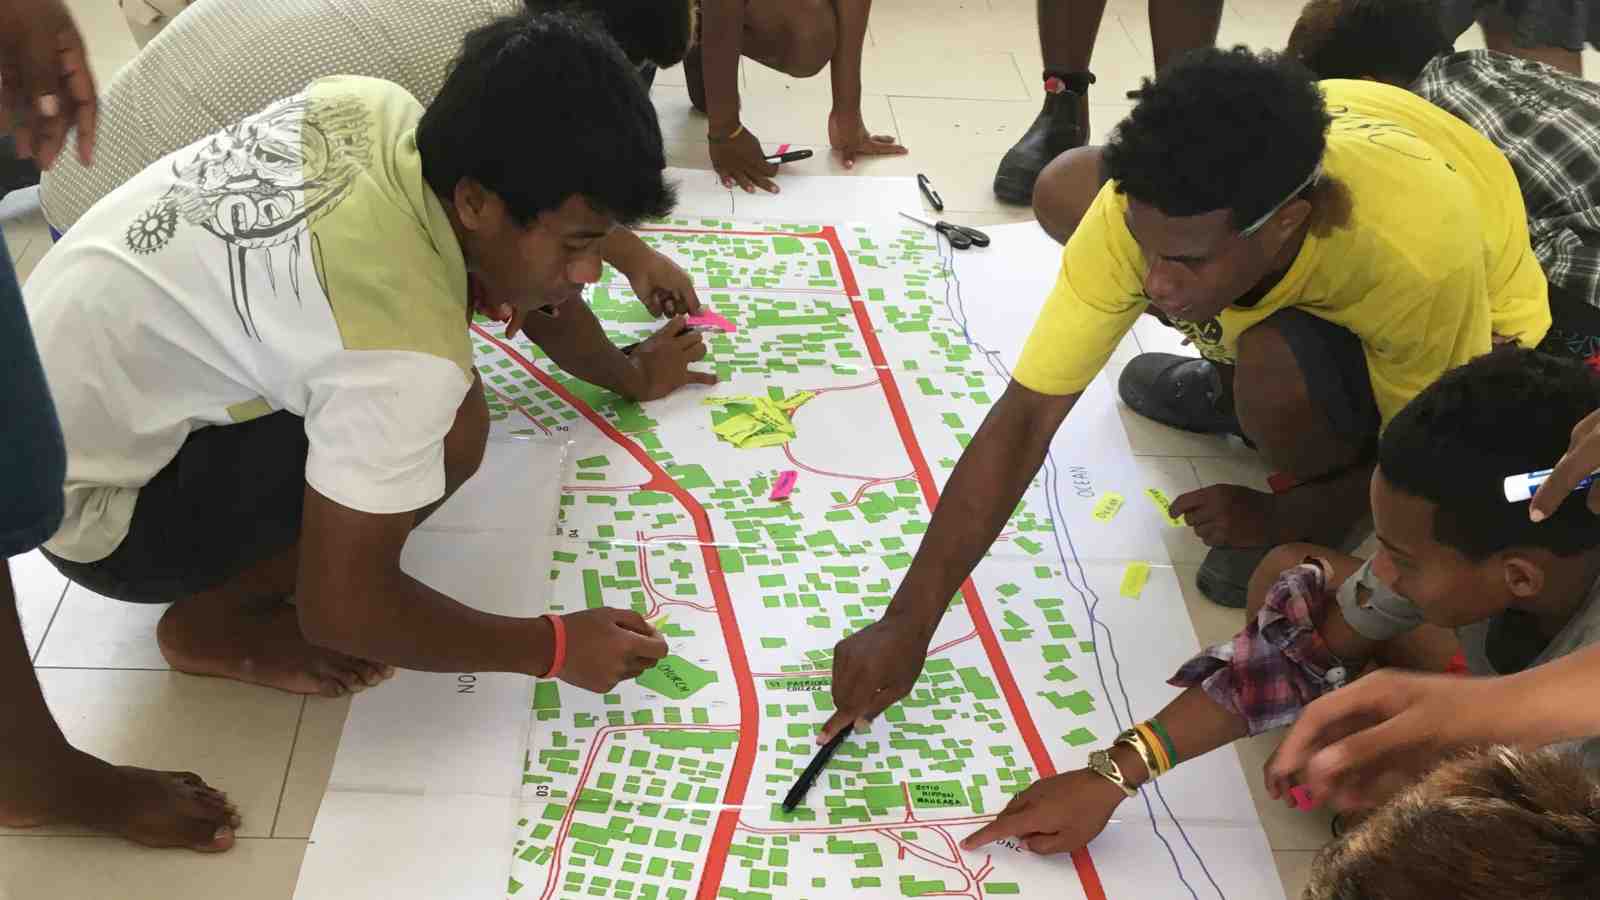 A group of youth from Betio, Kiribati sit on the floor around an architectural plan of their city, writing notes and planning their community centre. 